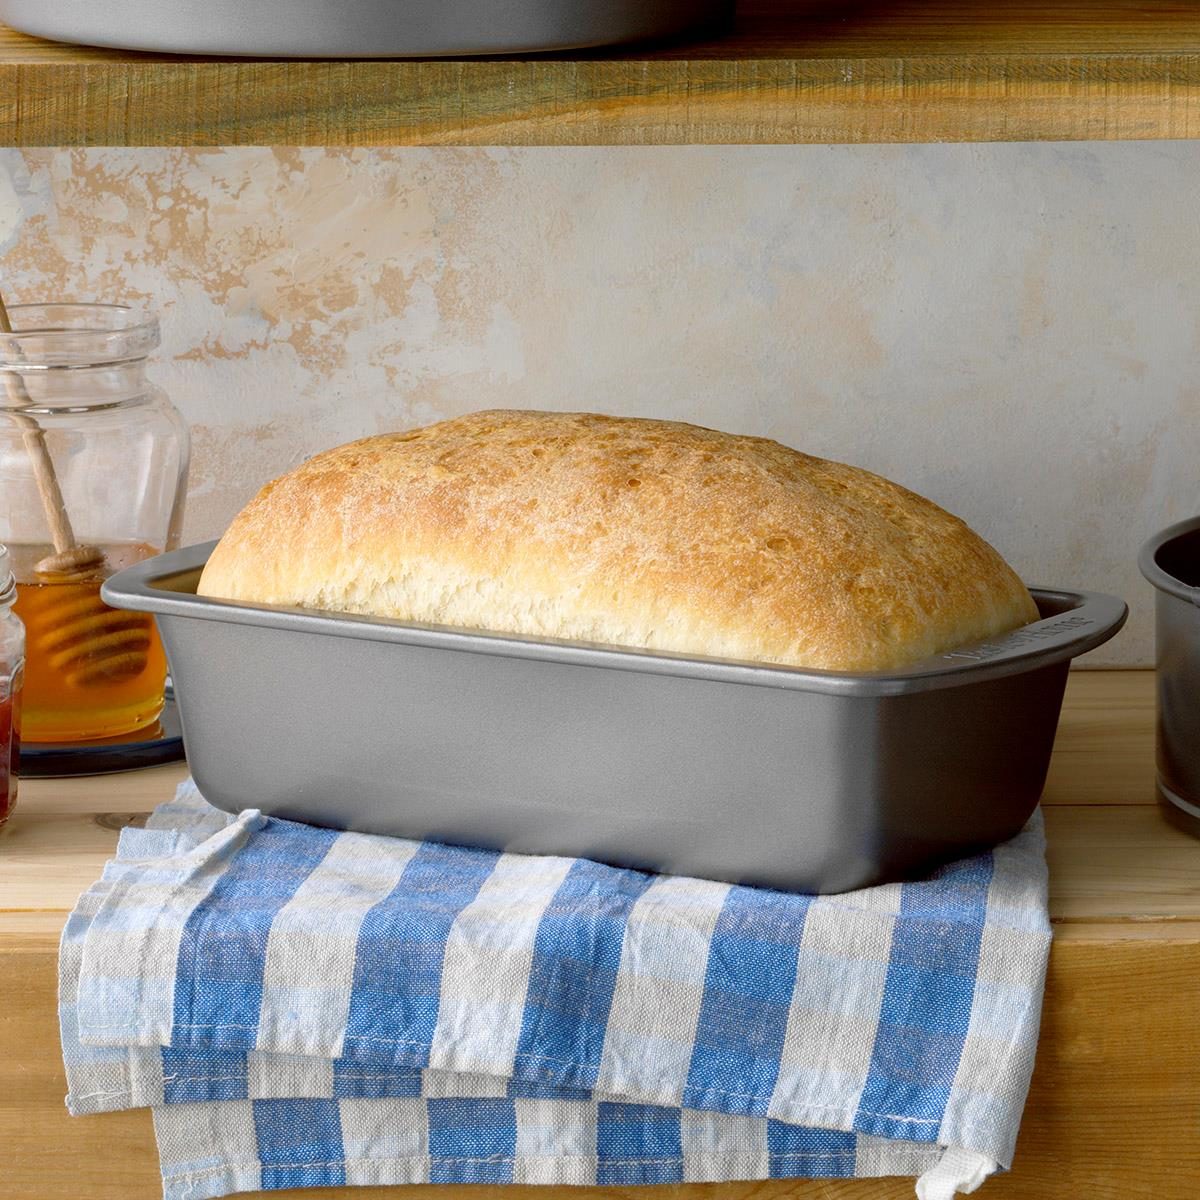 Tasty Carbon Steel Non-Stick Large Loaf Pan with Guidelines for Even  Slices, 9 x 5 